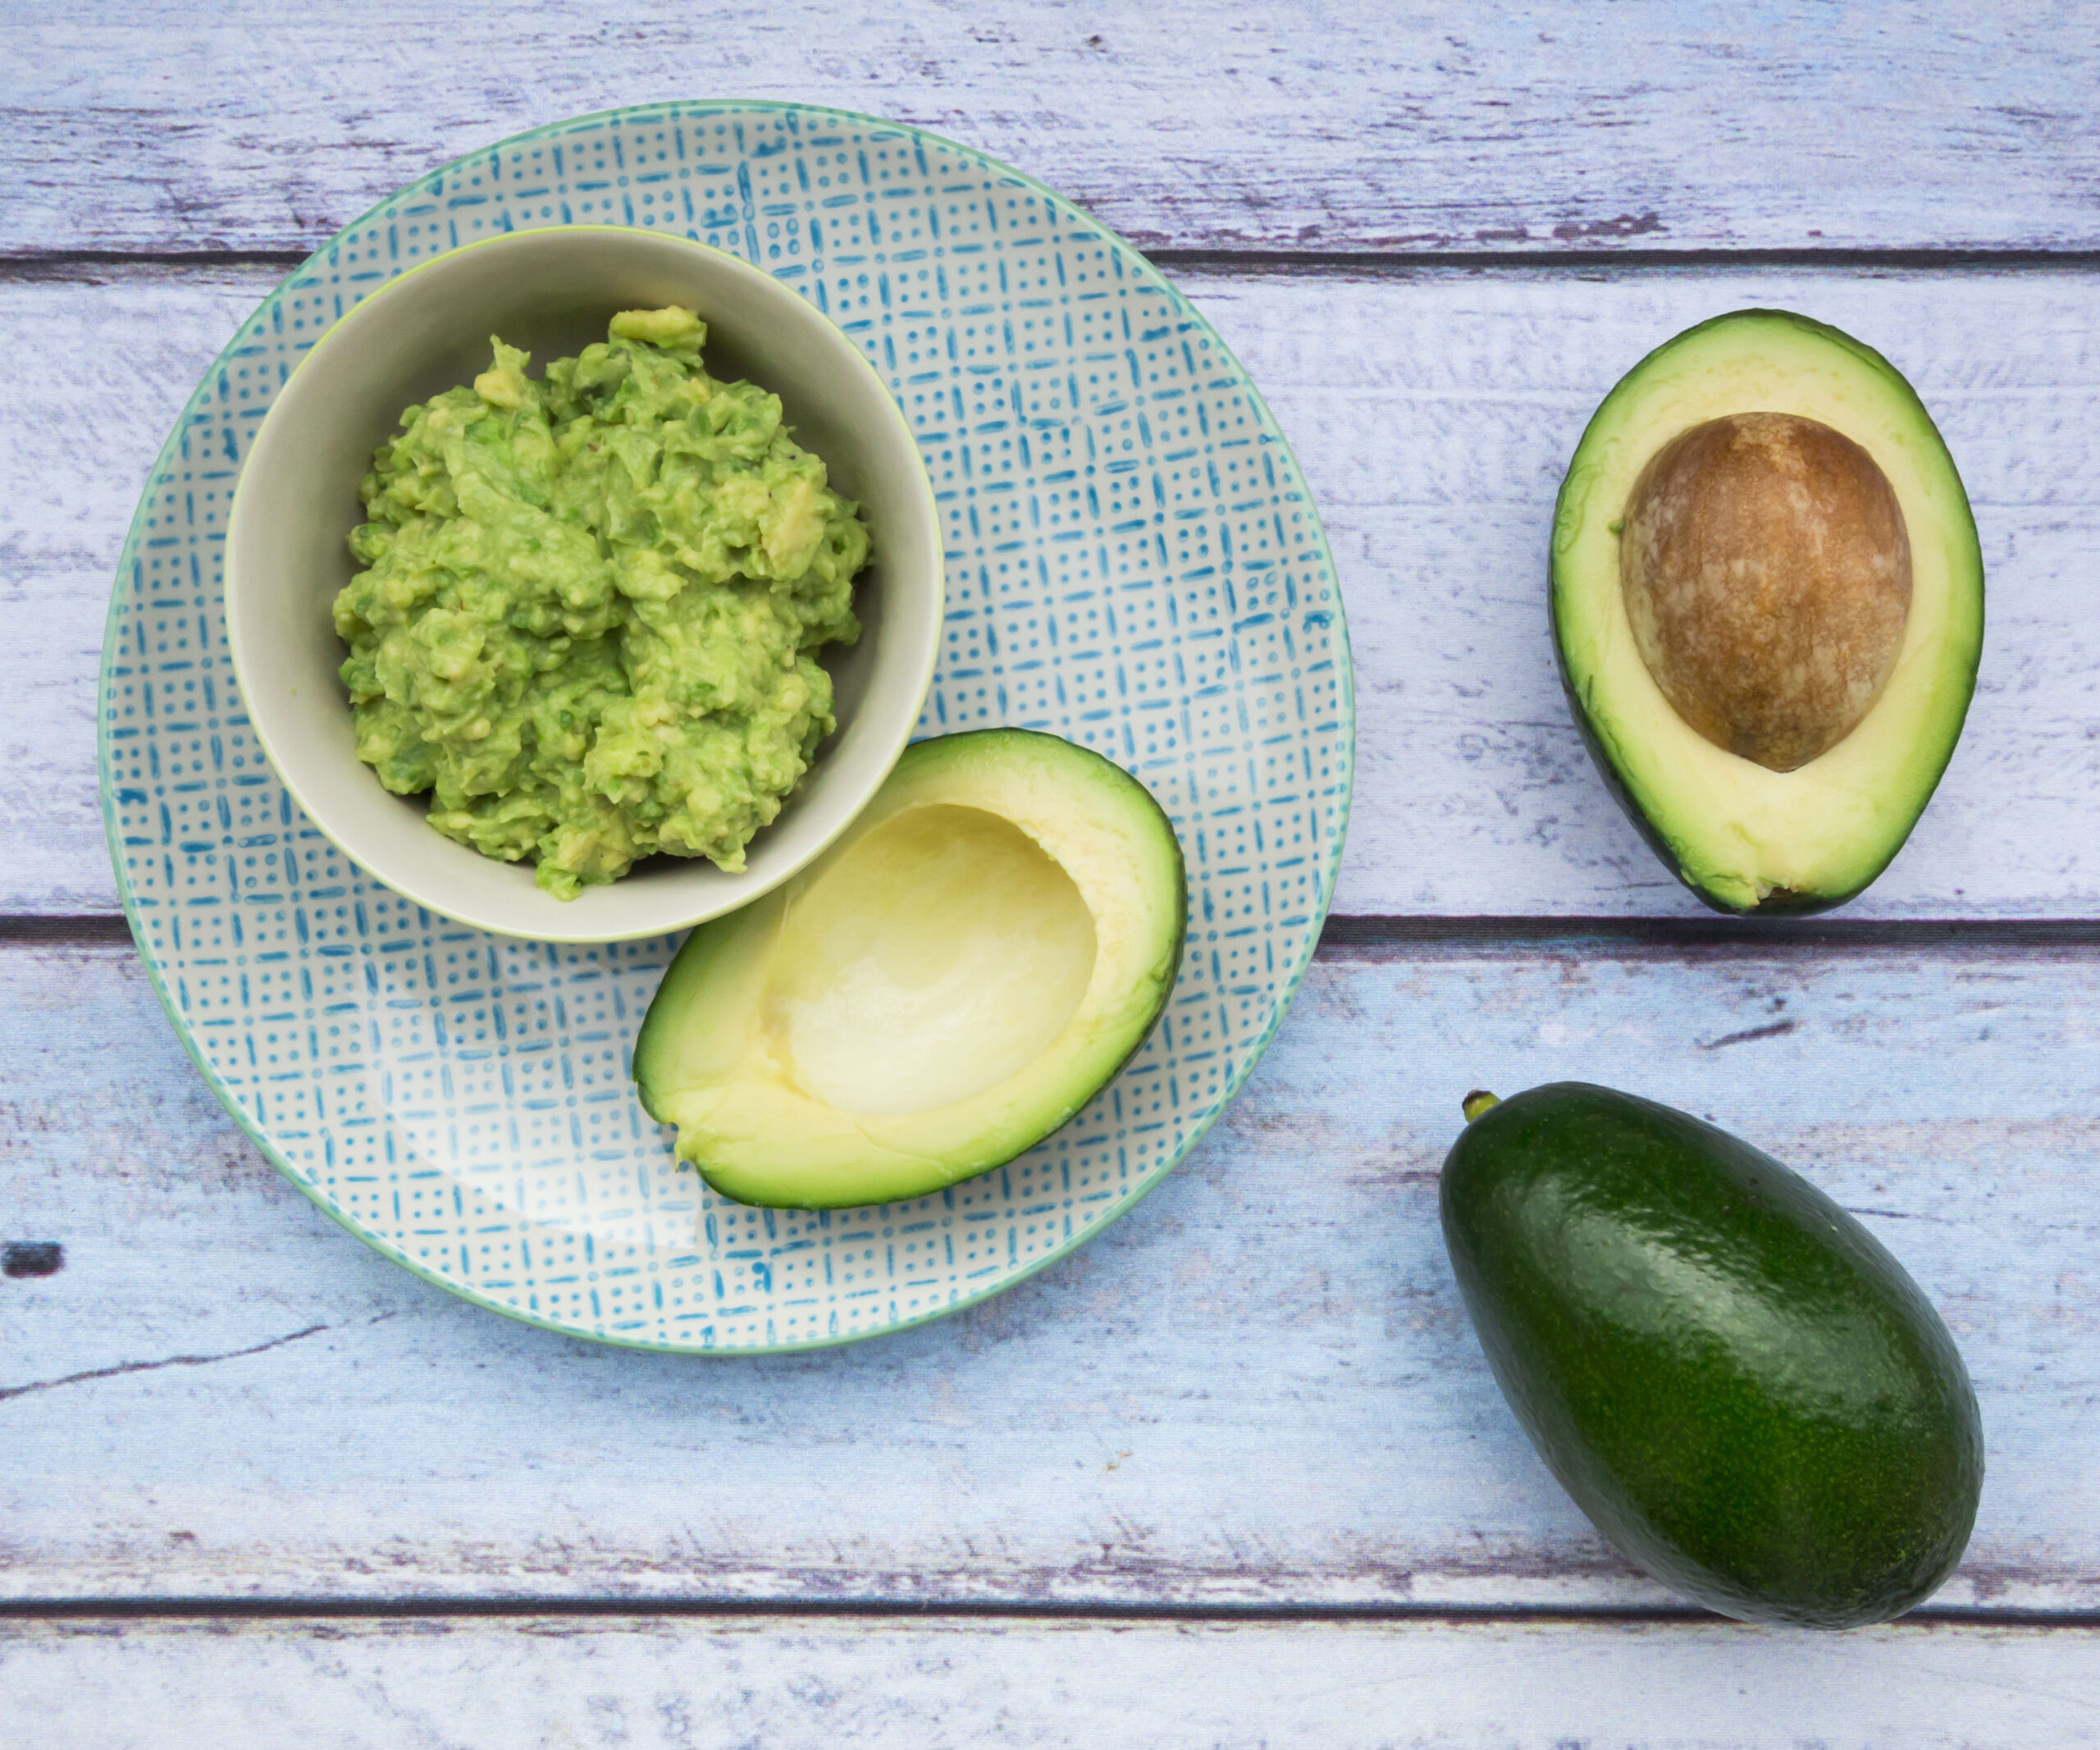 How to ripen an avocado in just 10 minutes